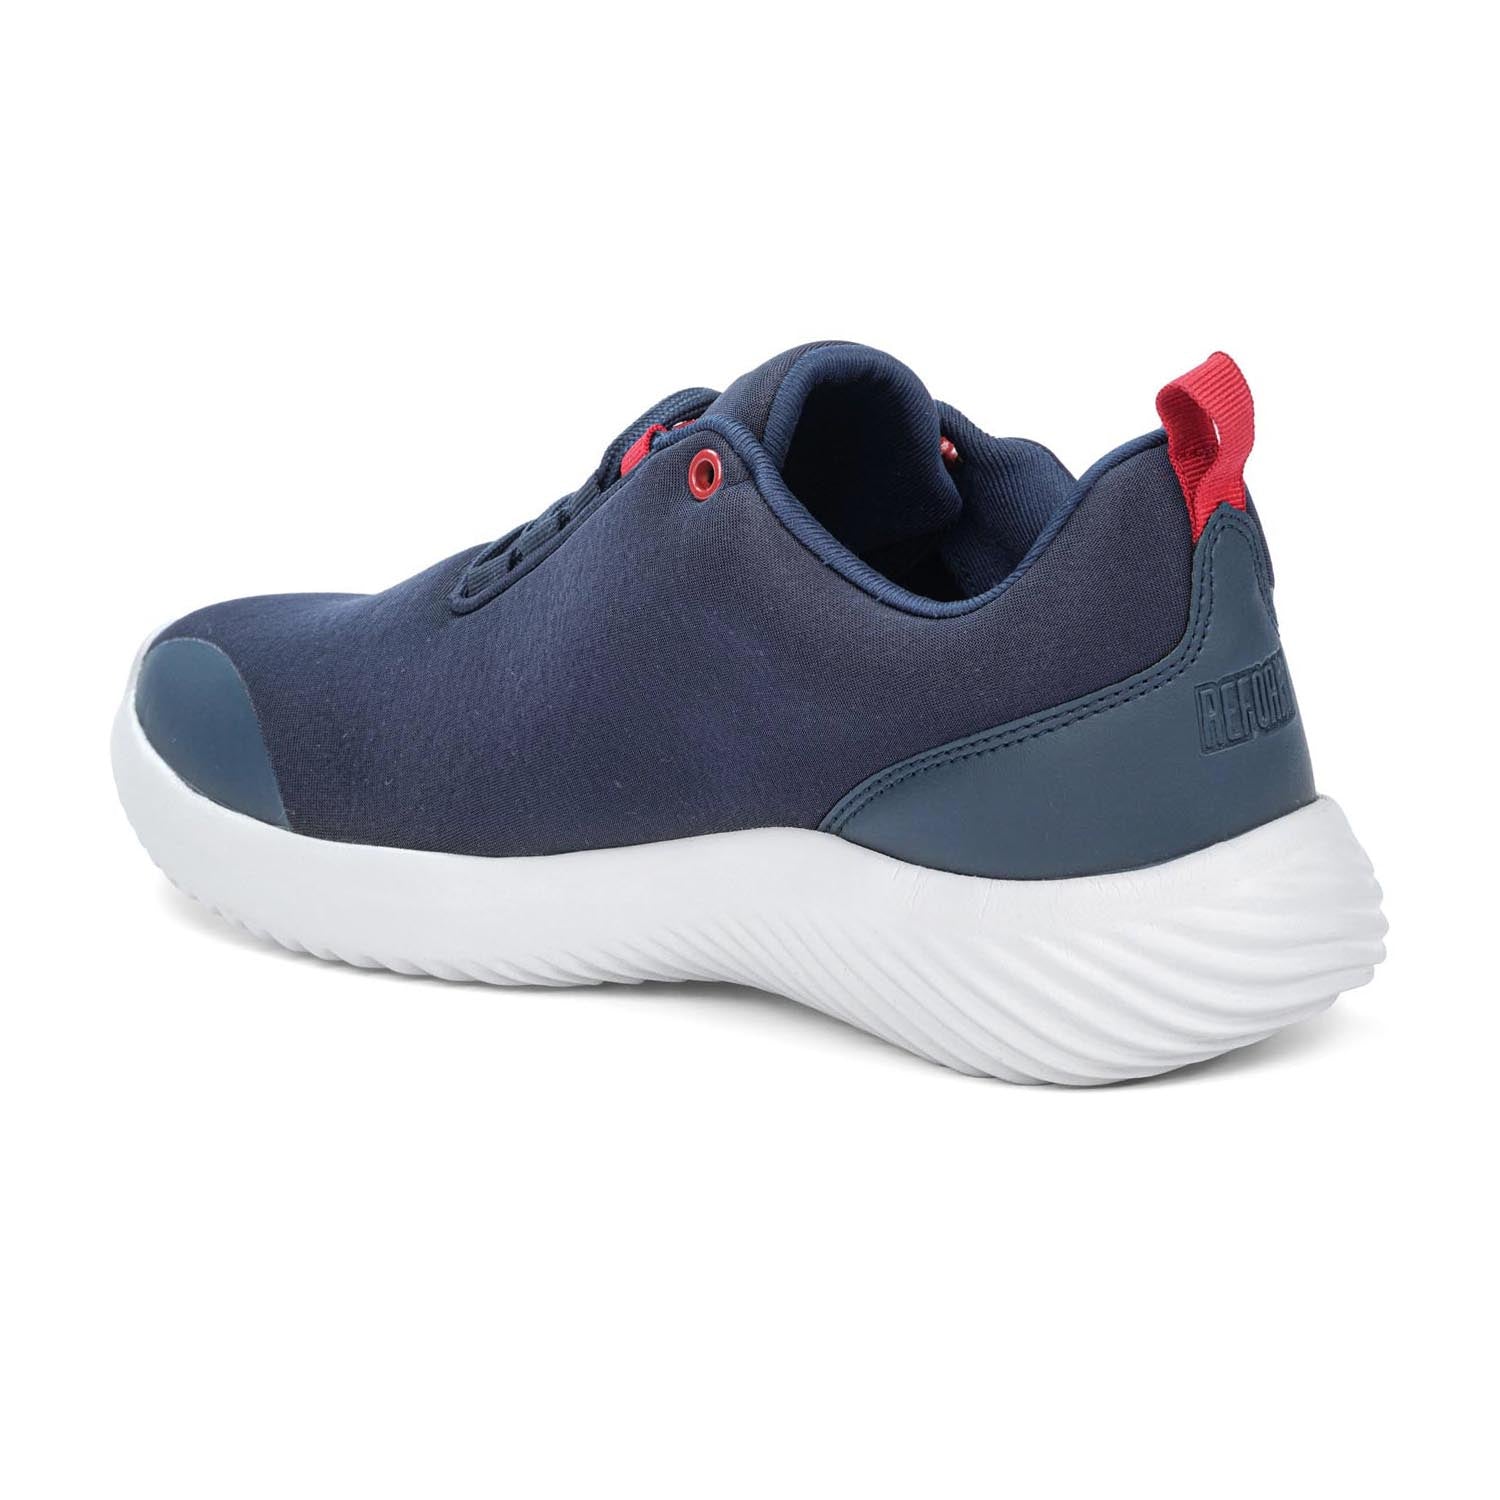 Navy Blue Solid Textile Lace Up Running Sport Shoes For Men